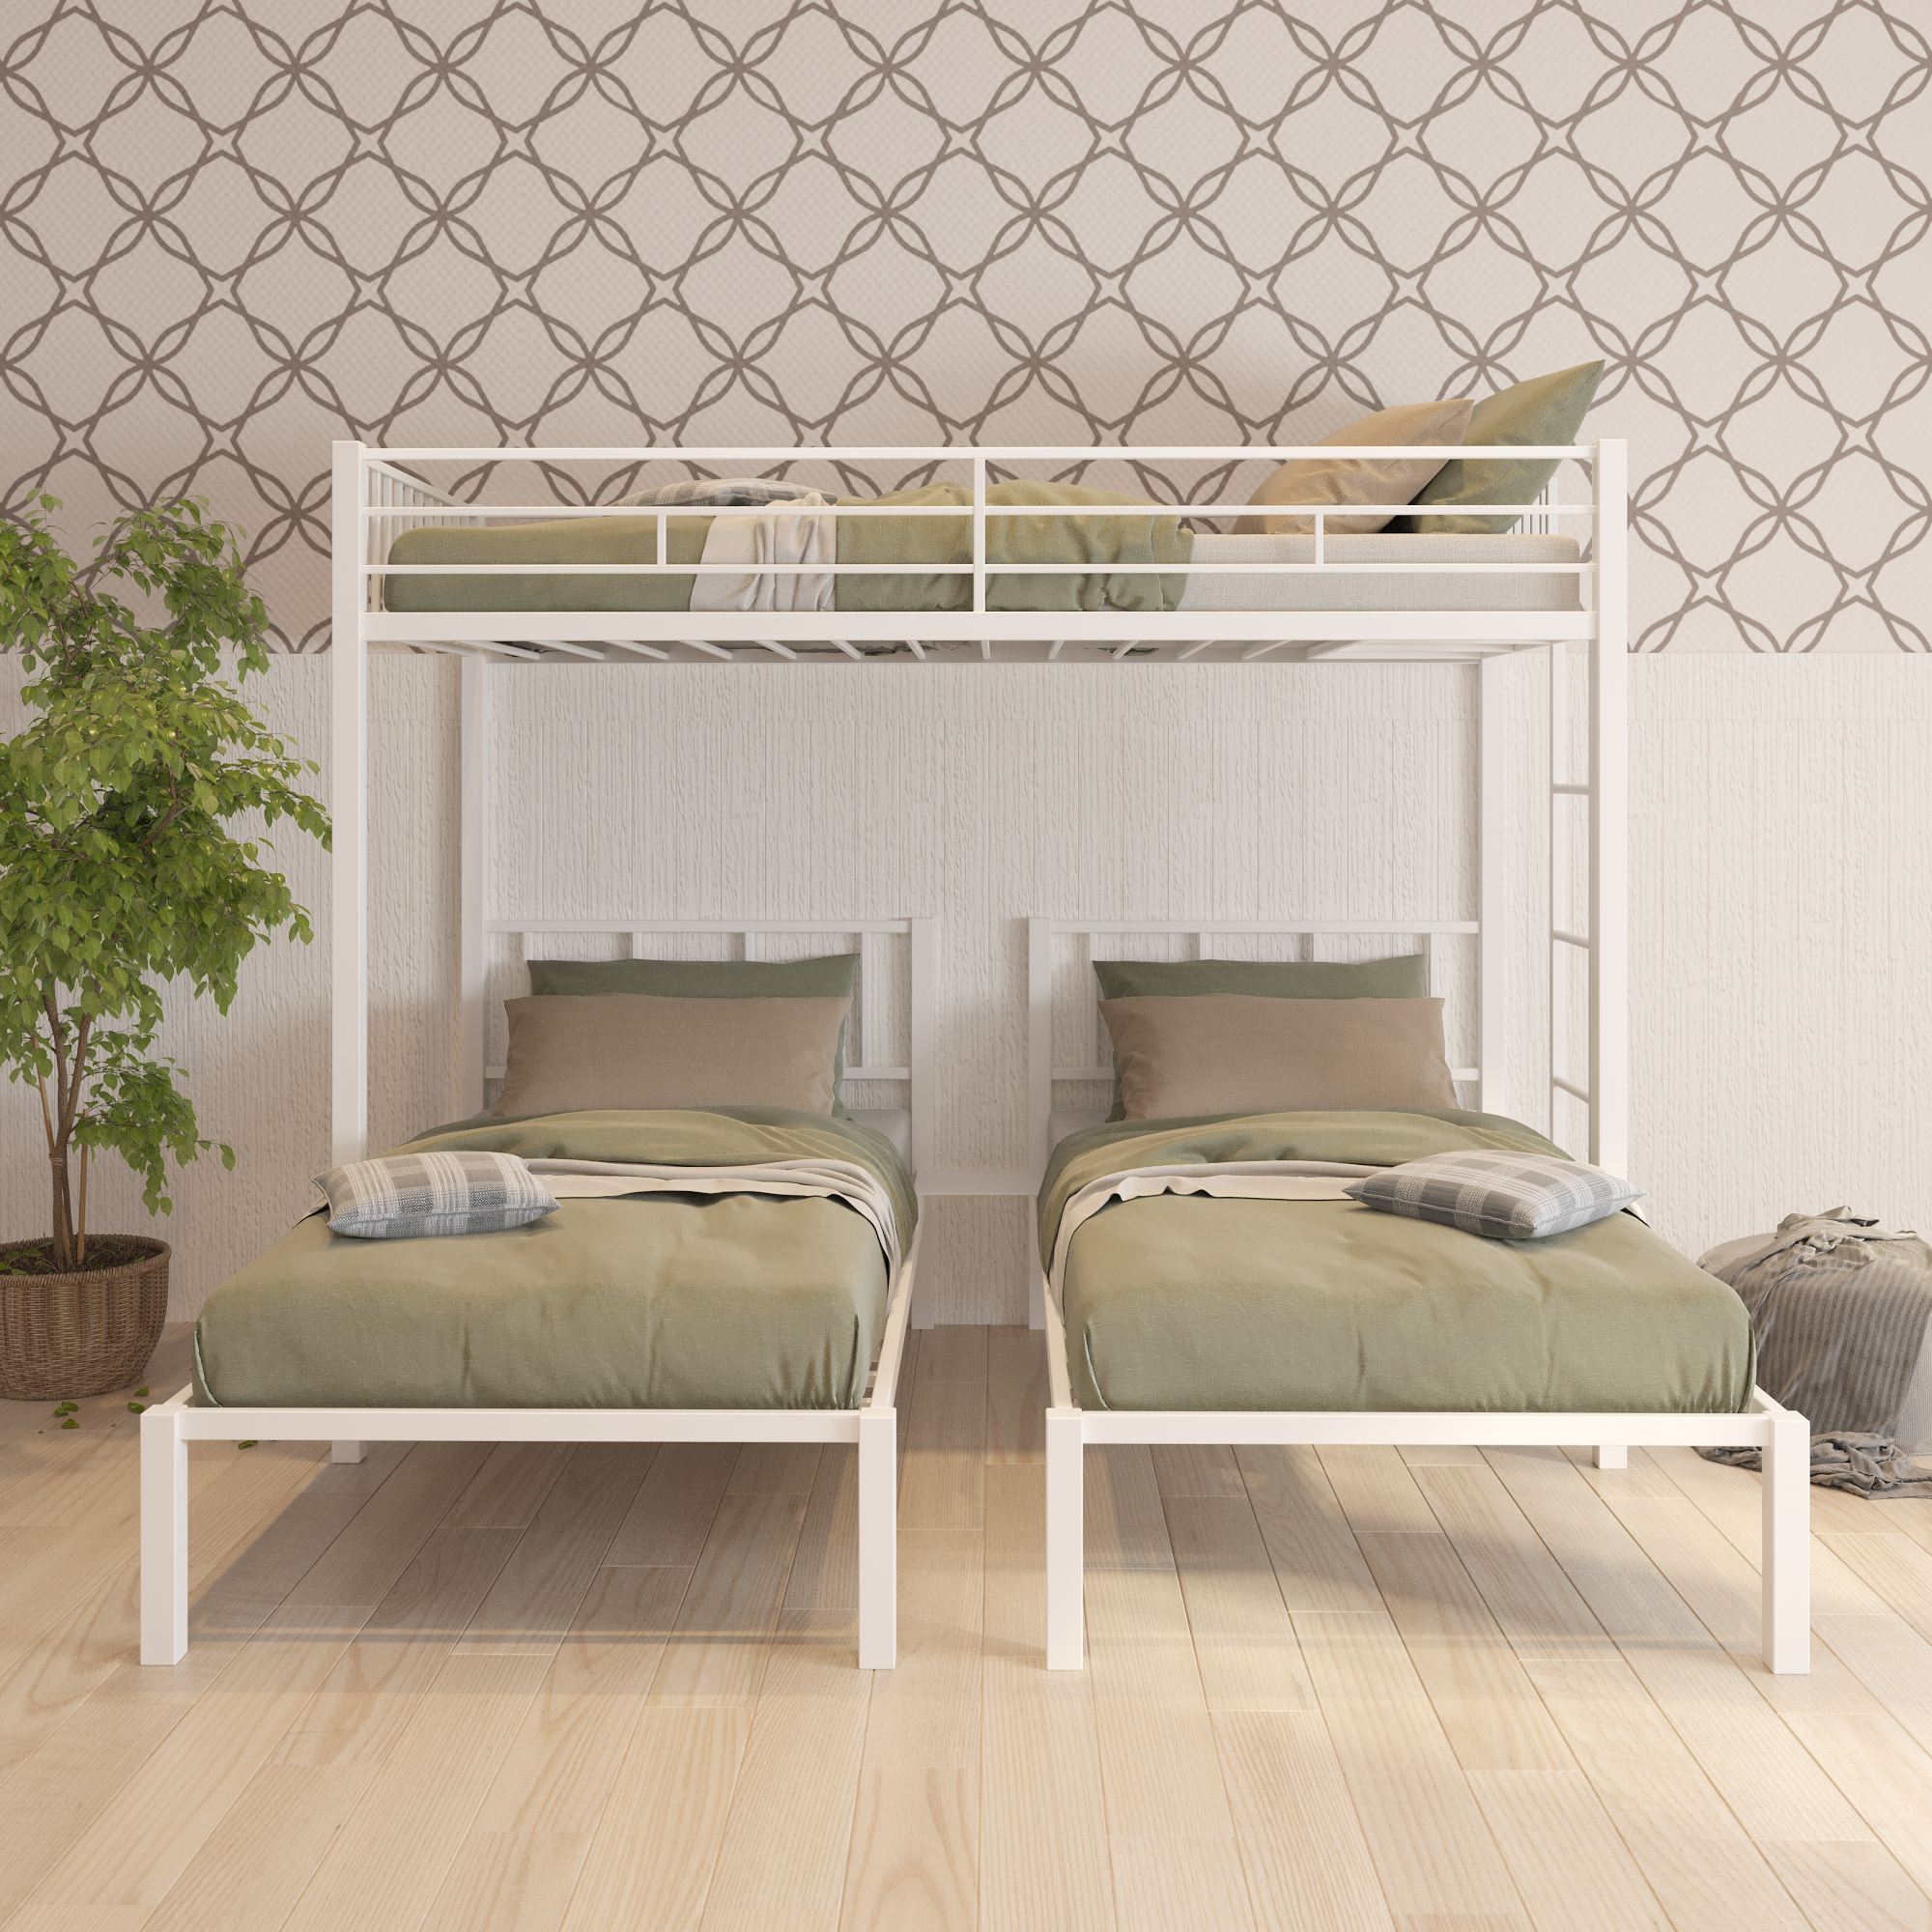 Triple twin bunk bed, can be separated into 3 twin beds-Boyel Living